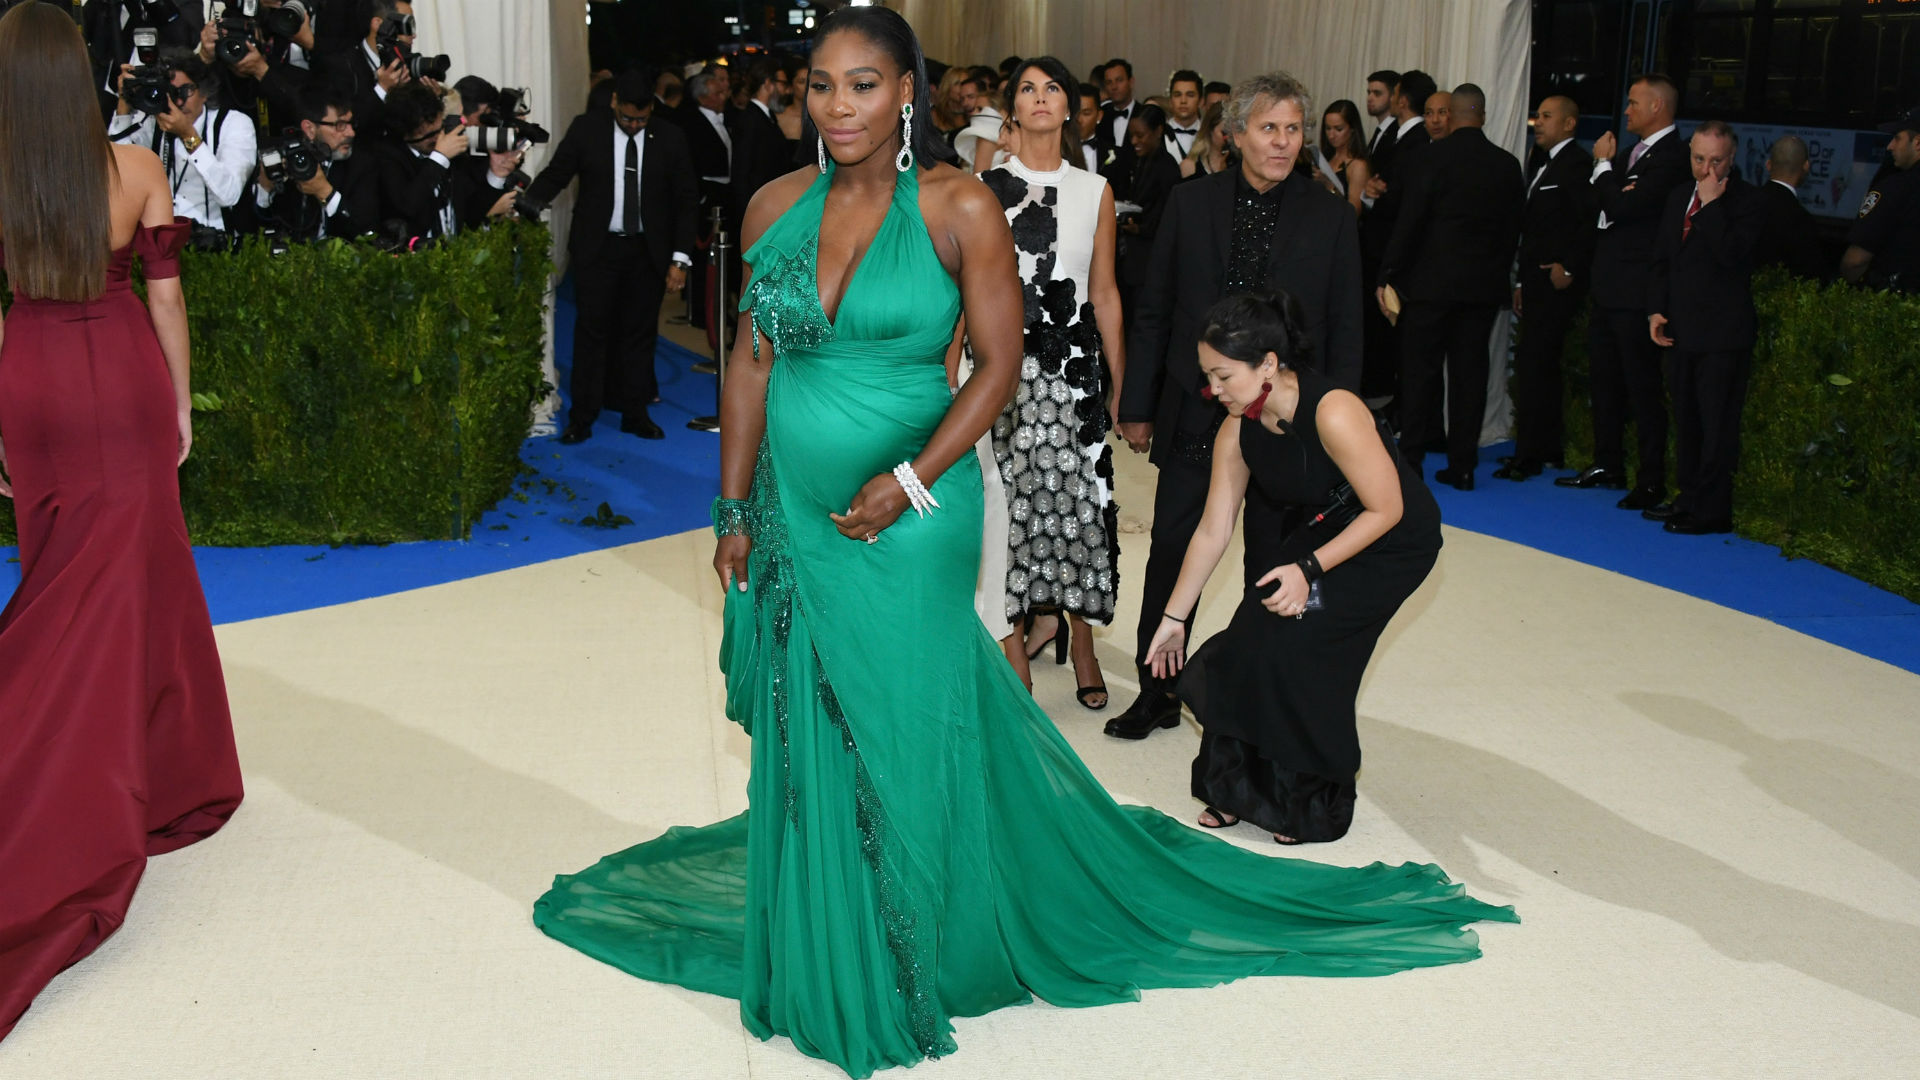 A-Rod, Tom Brady and Serena Williams dazzle at 2017 Met Gala | Other Sports | Sporting ...